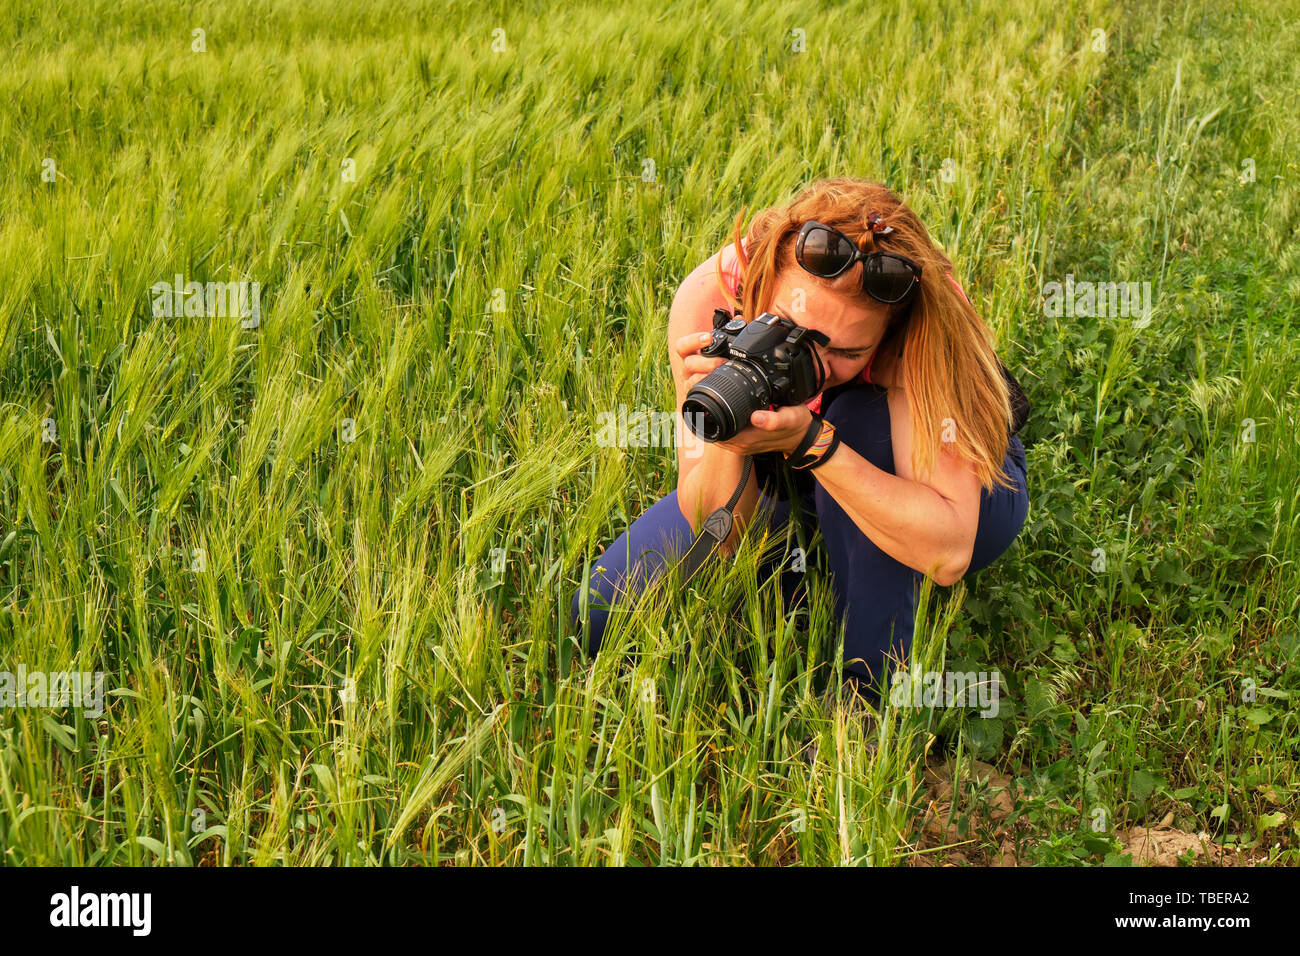 Macin mountains, Dobrogea, Romania - May 18, 2019: Woman photographer taking low angle photos of a rye field, at golden hour, with warm light. Stock Photo